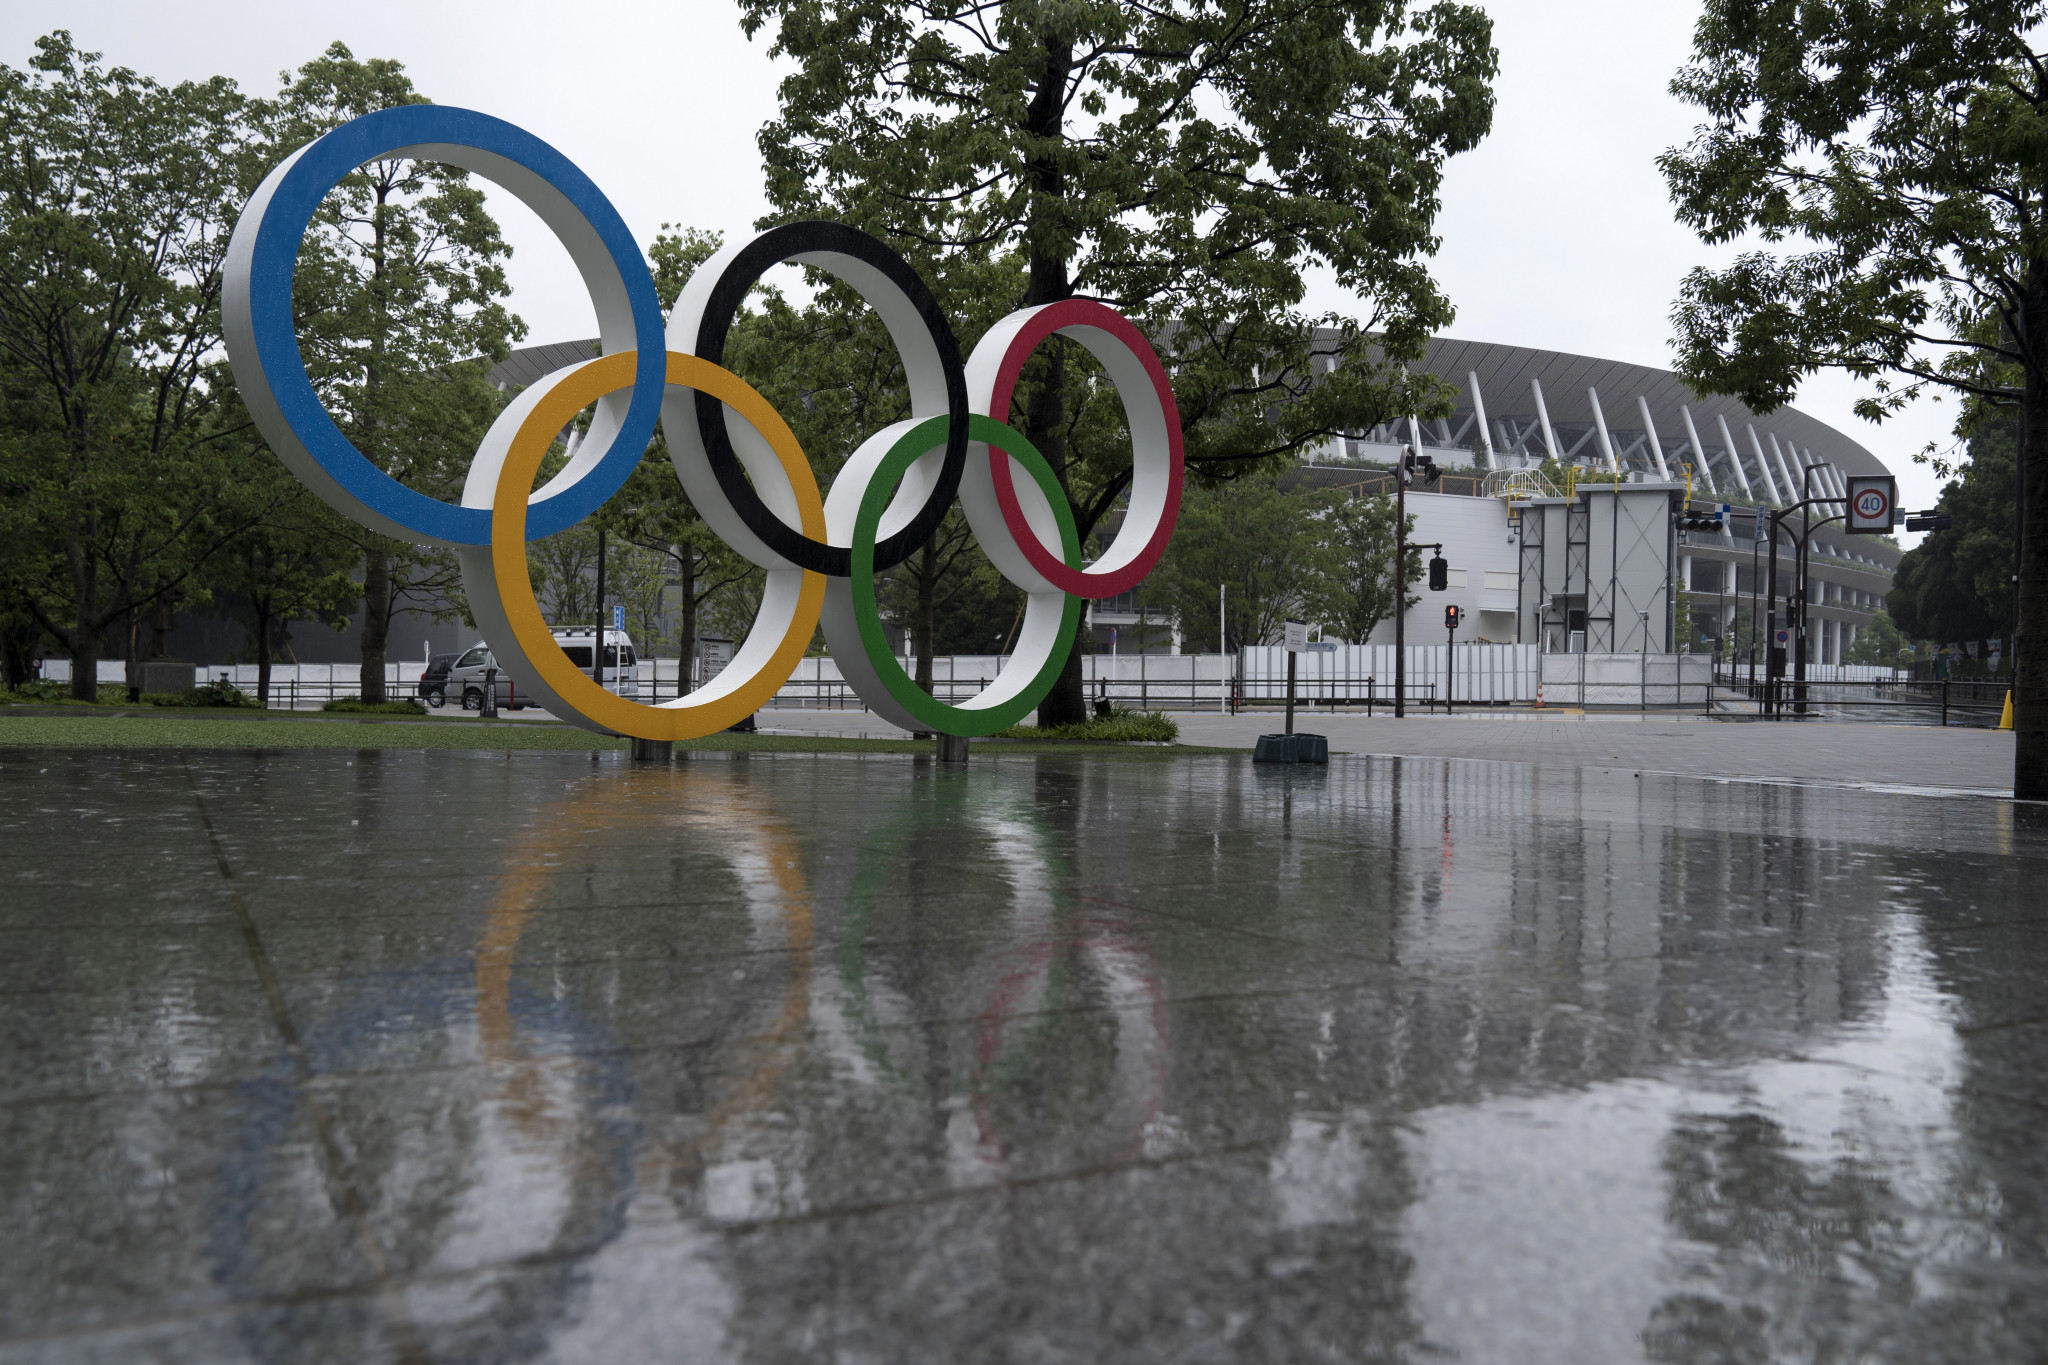 Tokyo 2020 are hoping to develop coronavirus countermeasures by the end of 2020 ©Getty Images